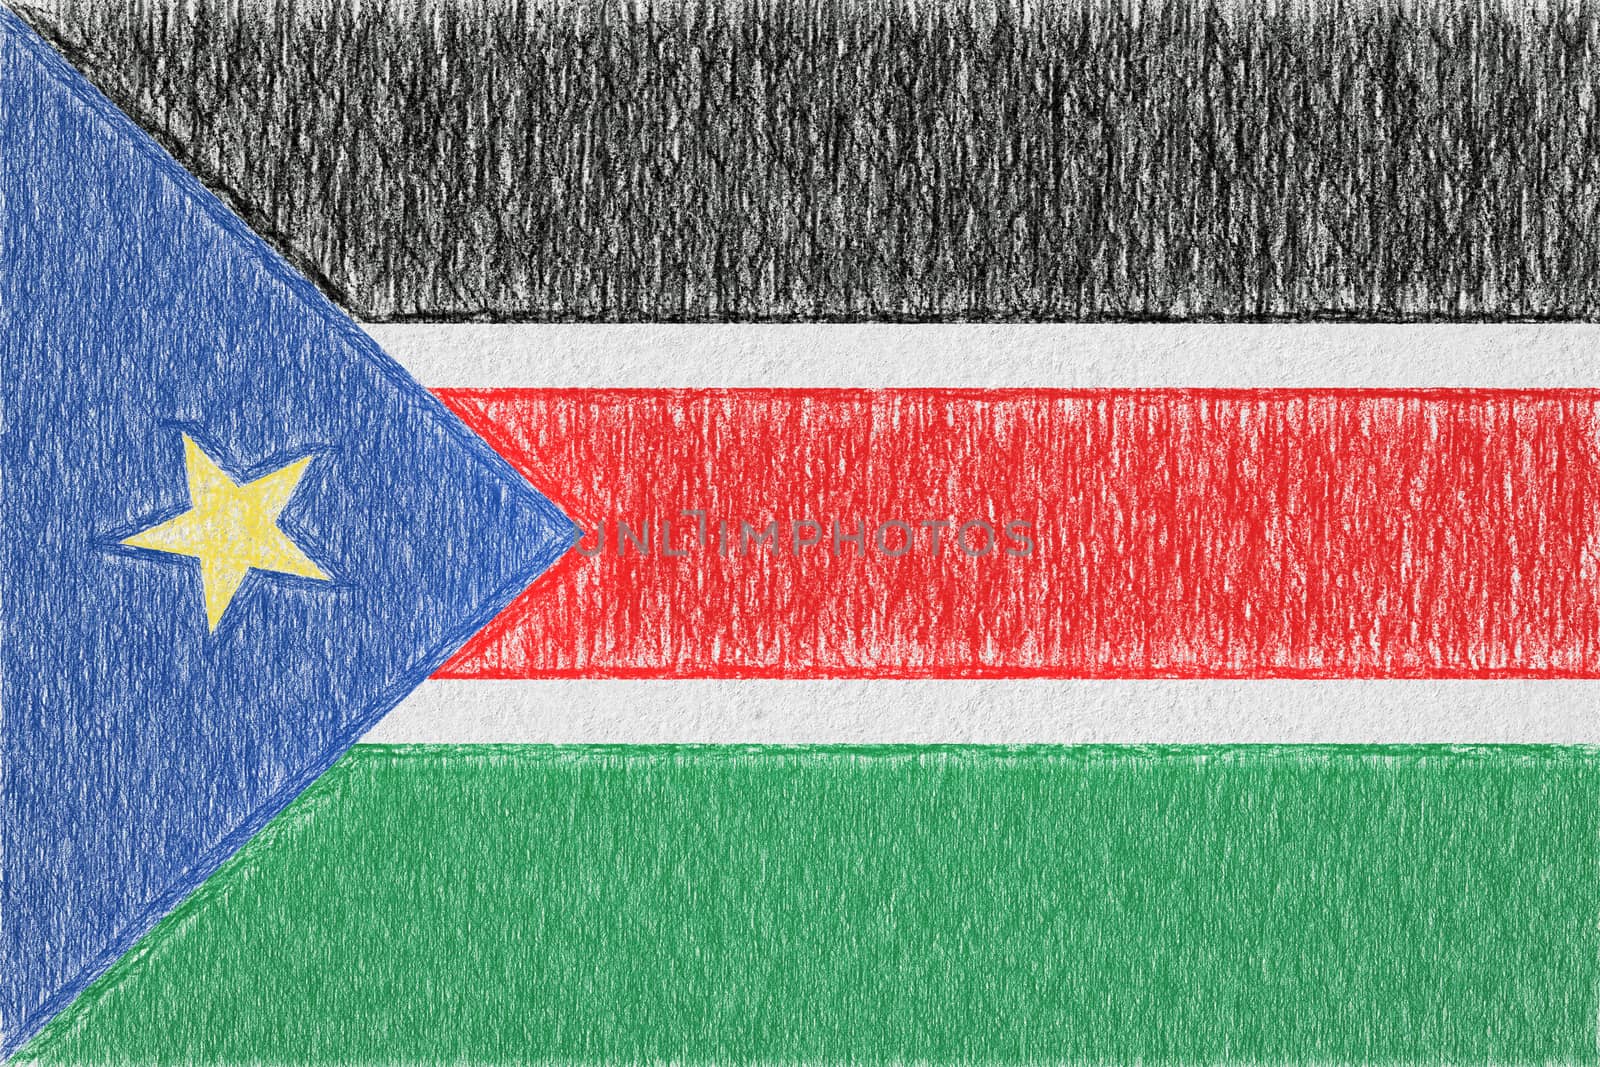 South Sudan painted flag. Patriotic drawing on paper background. National flag of South Sudan